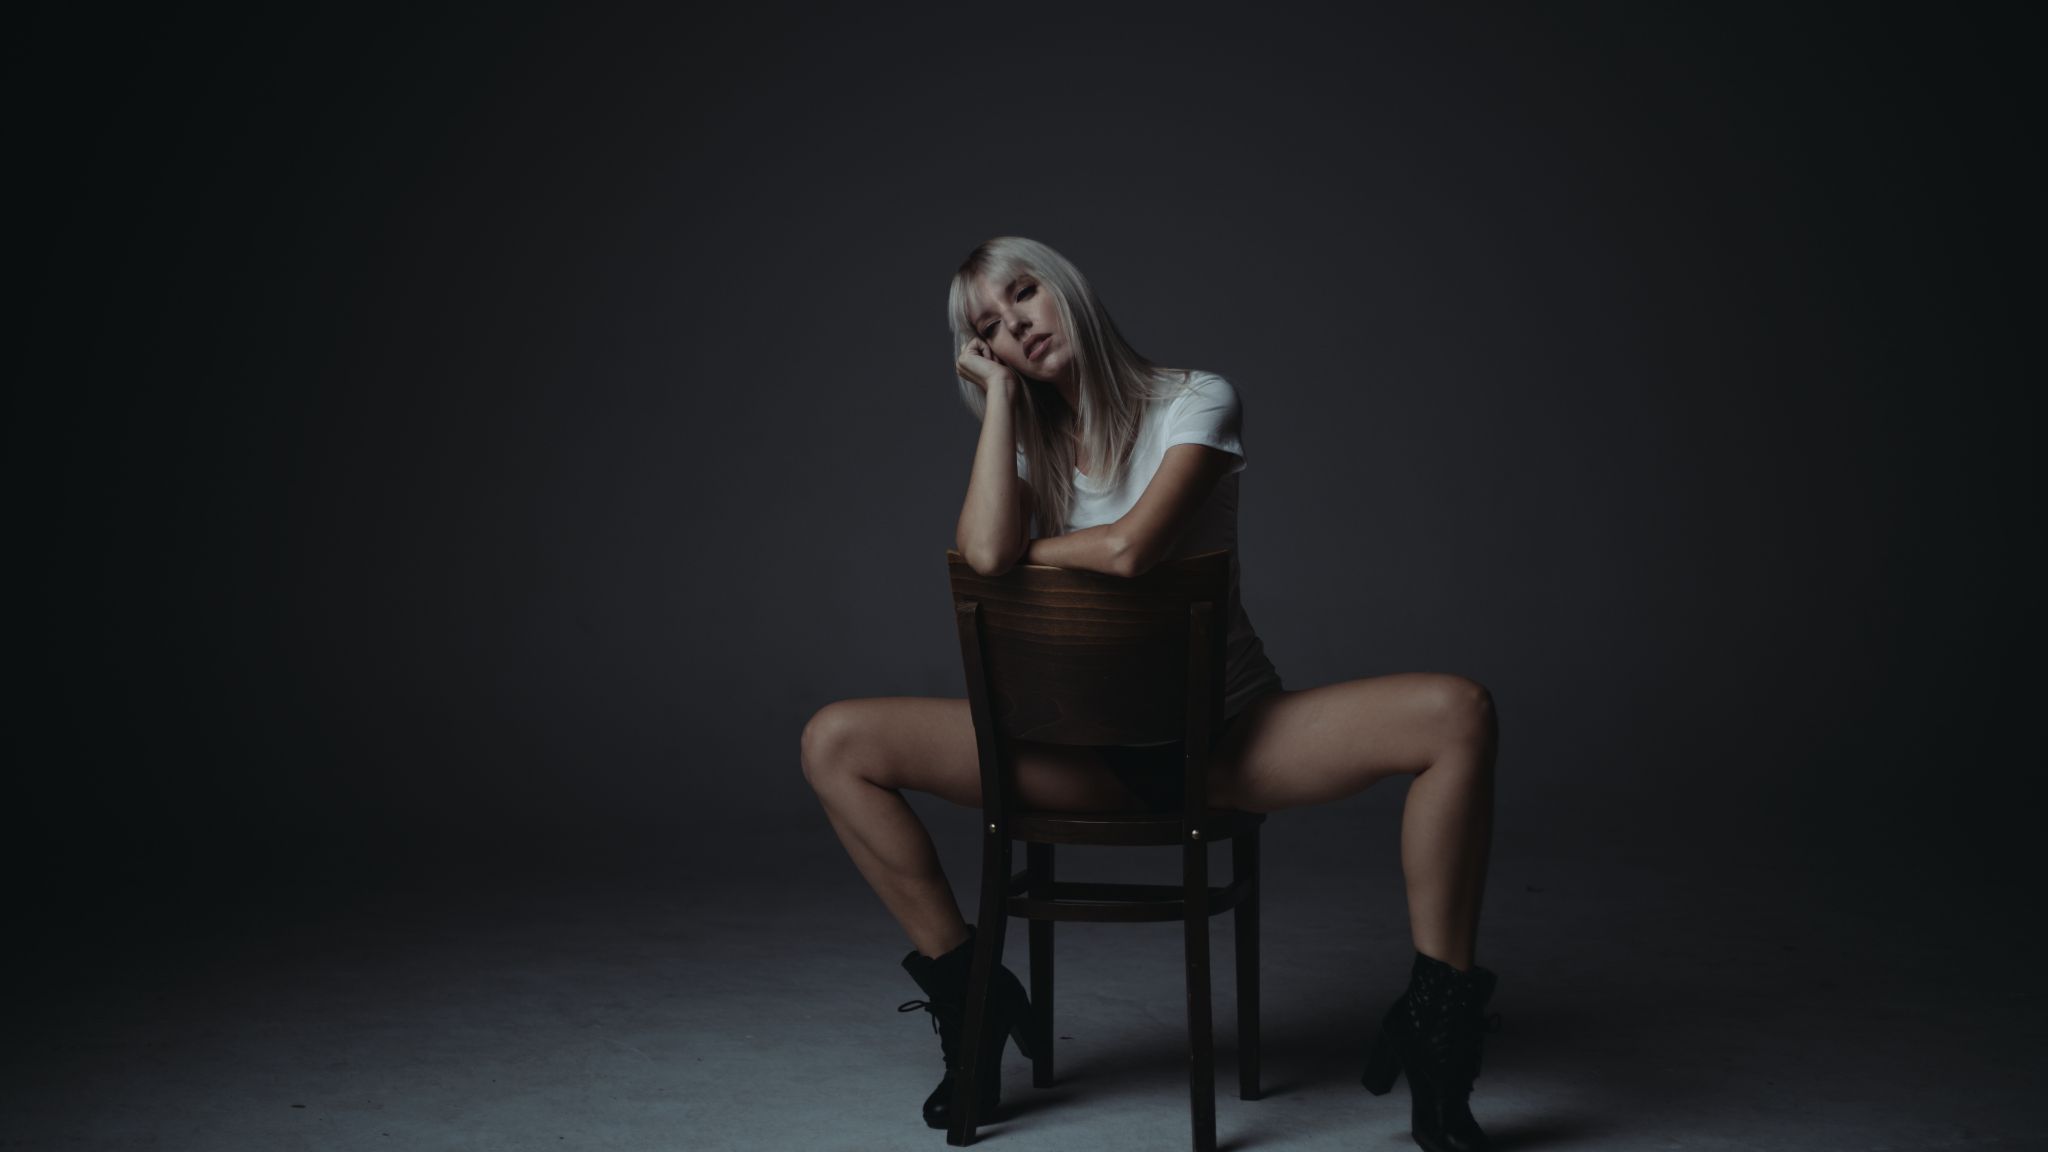 Female model with long, blond hair and white sleeveless shirt posing on a backwards chair facing camera.